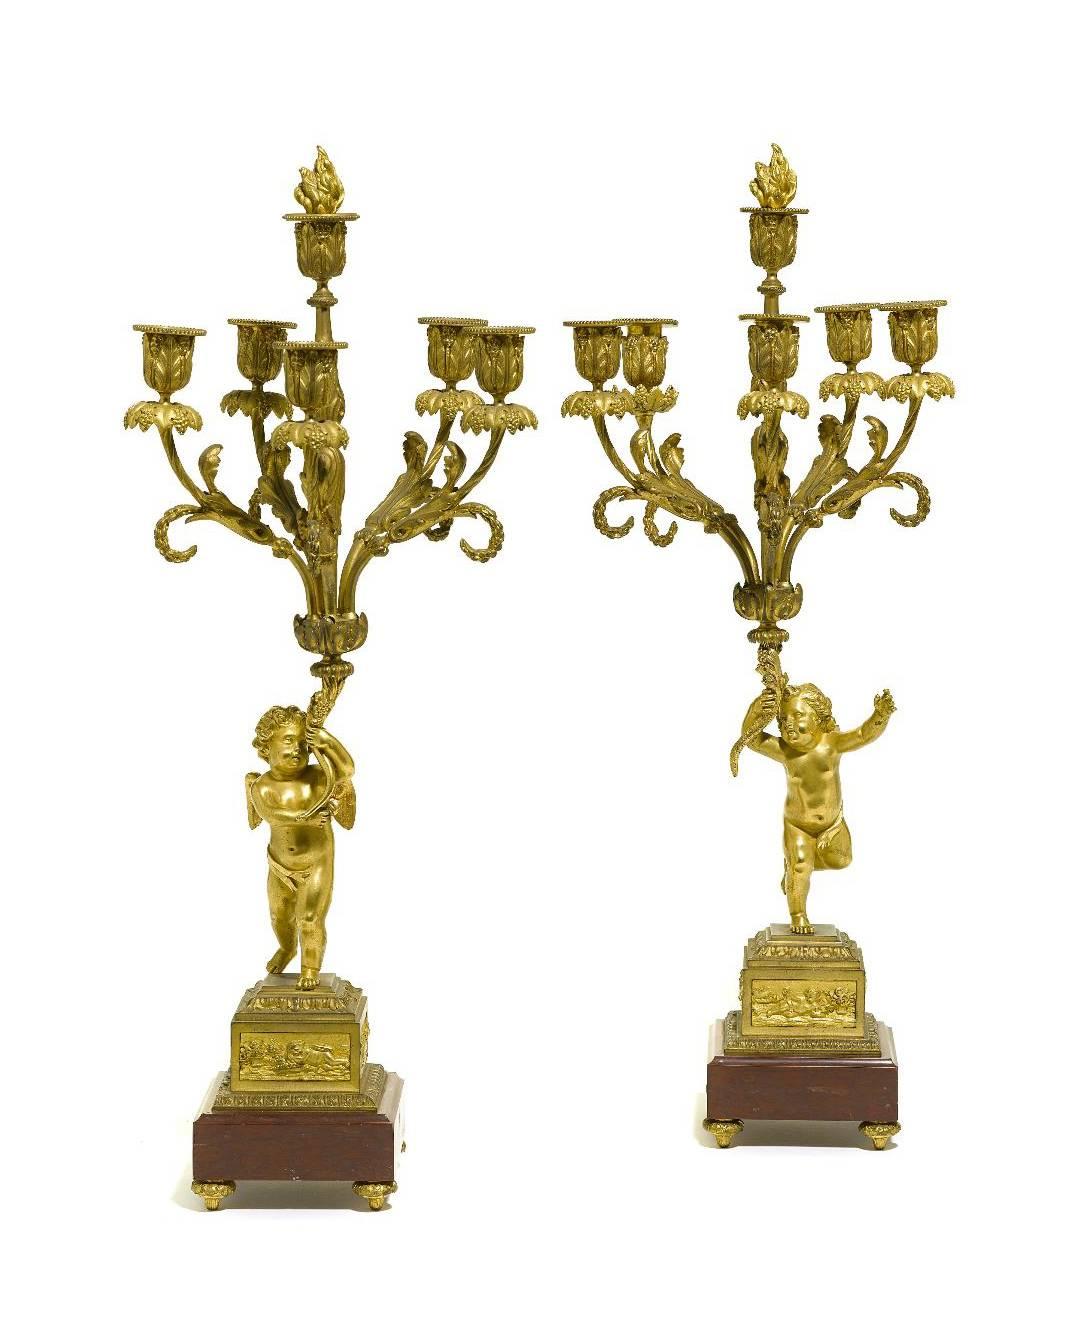 Pair of French 19th Century Louis XV Style Gilt Bronze Candelabra with Cherubs For Sale 2